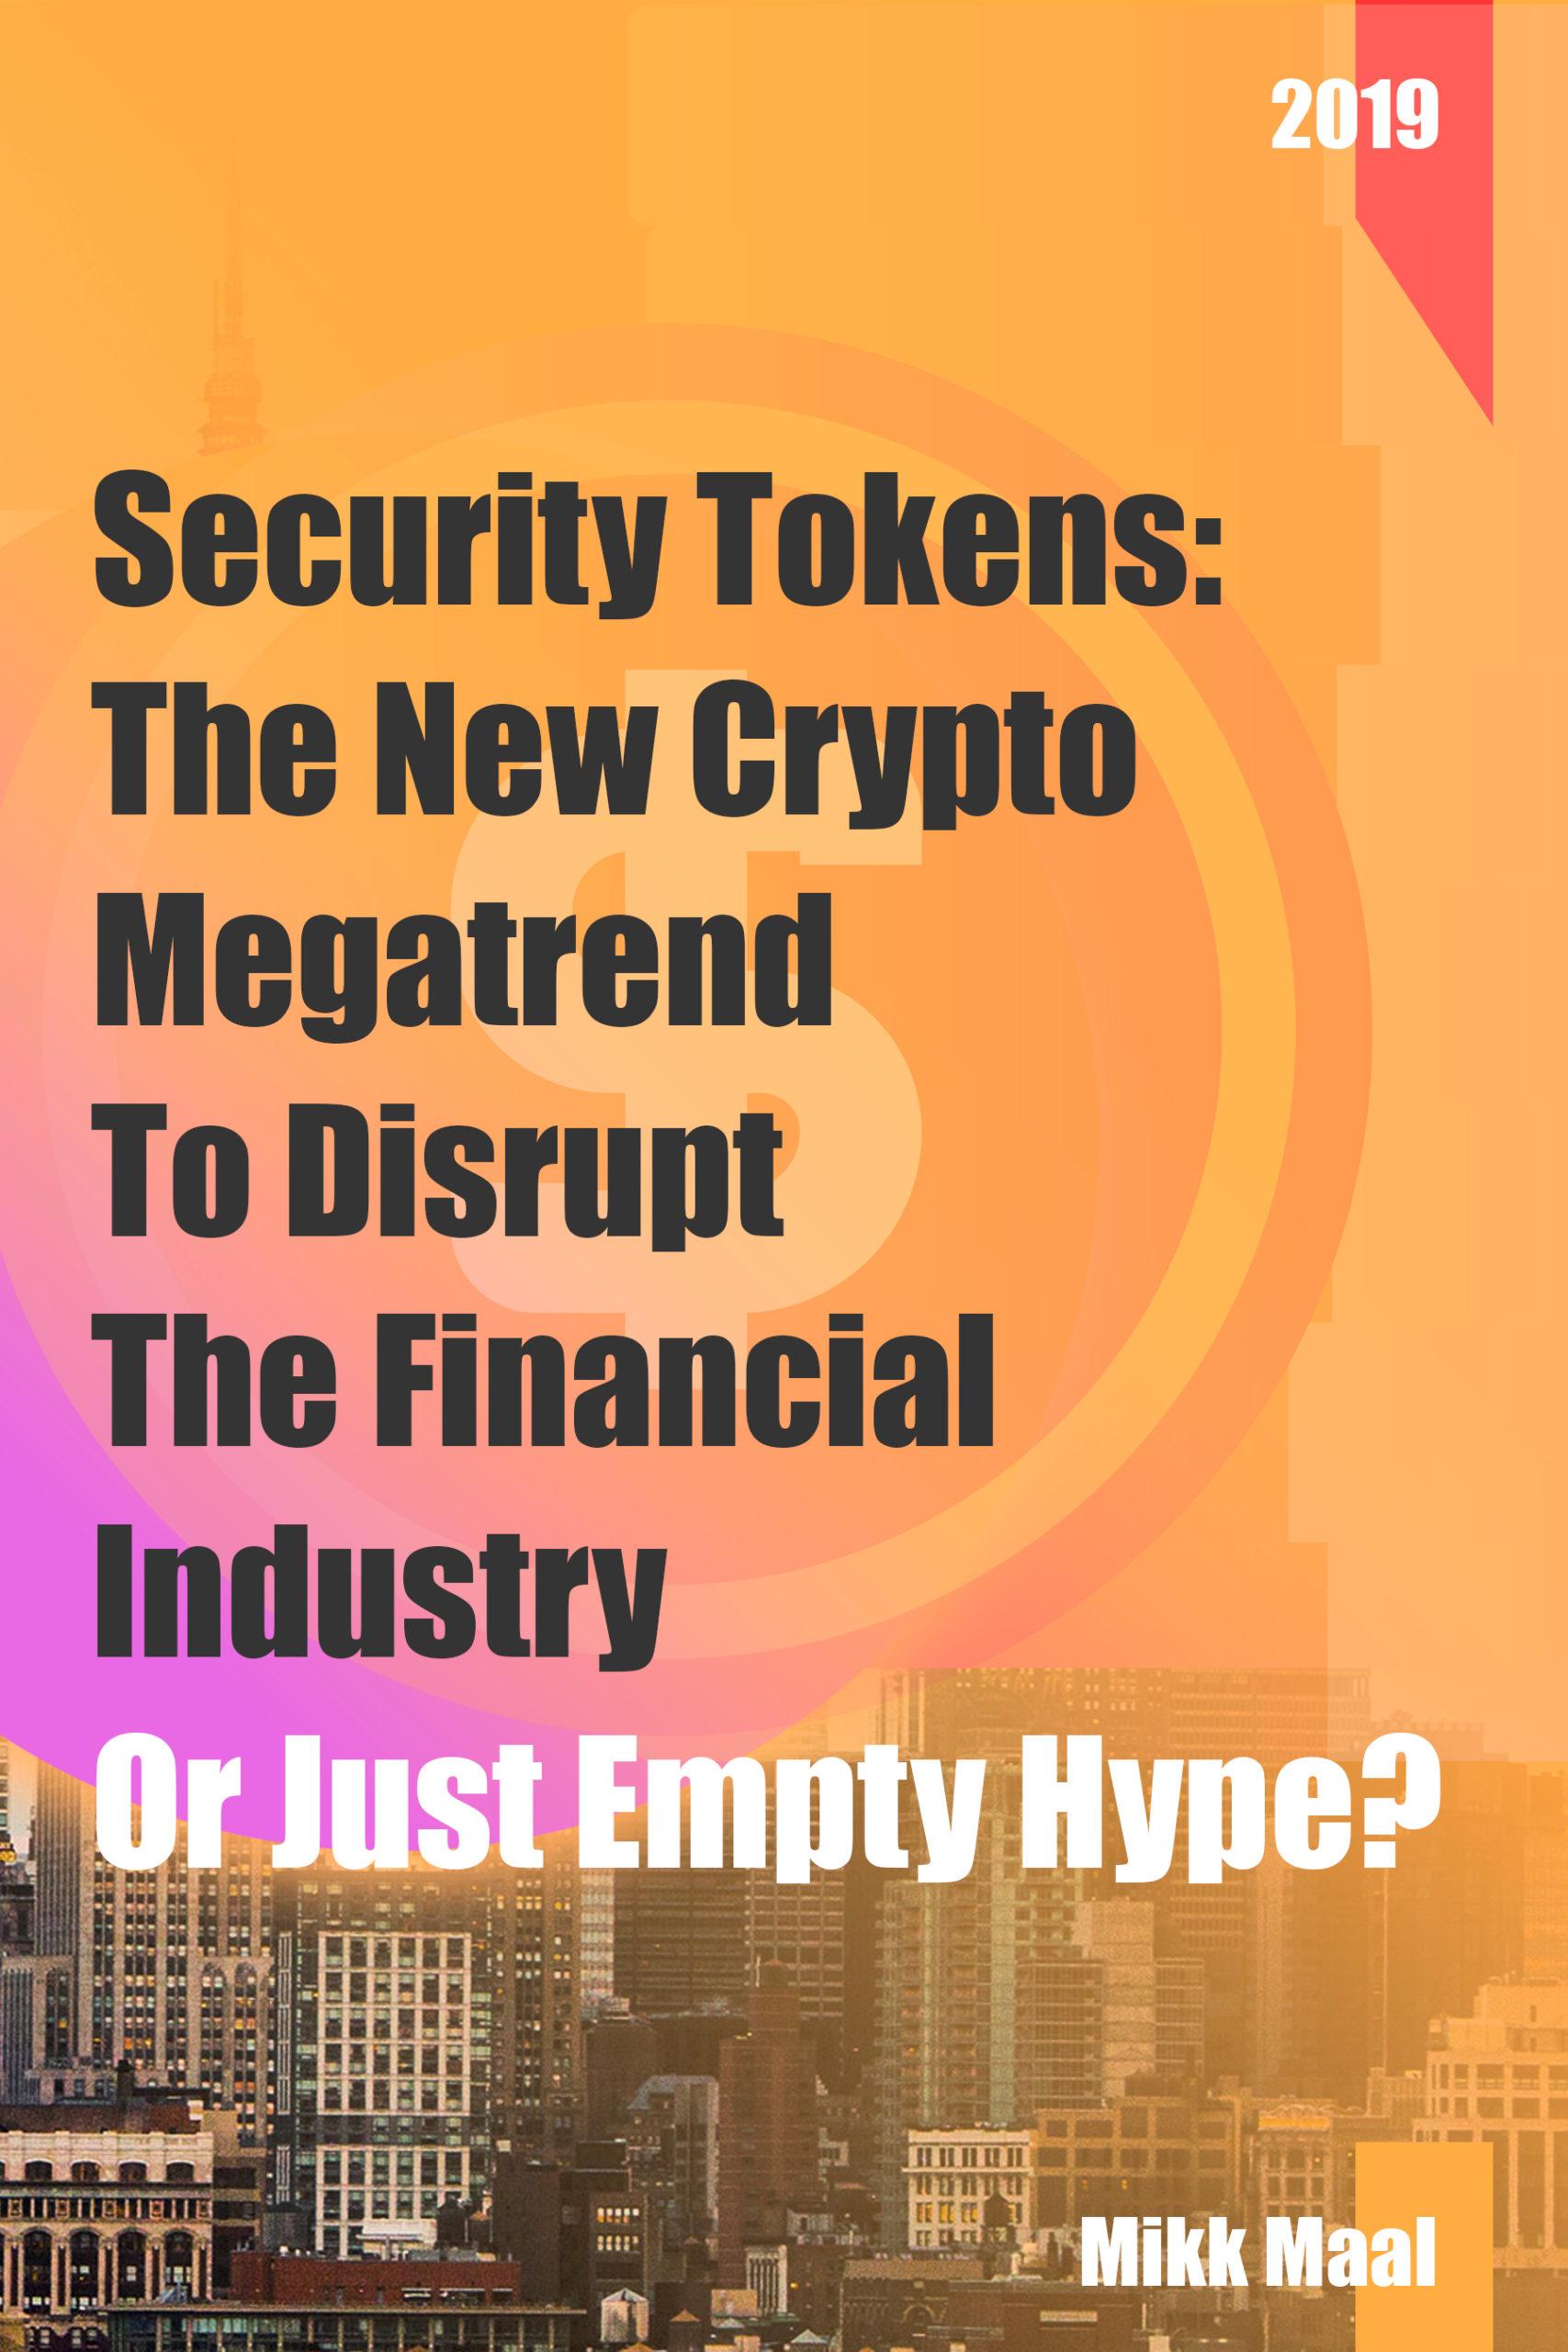 Security Tokens: The New Crypto Megatrend to disrupt the Financial Industry or Just Empty Hype?